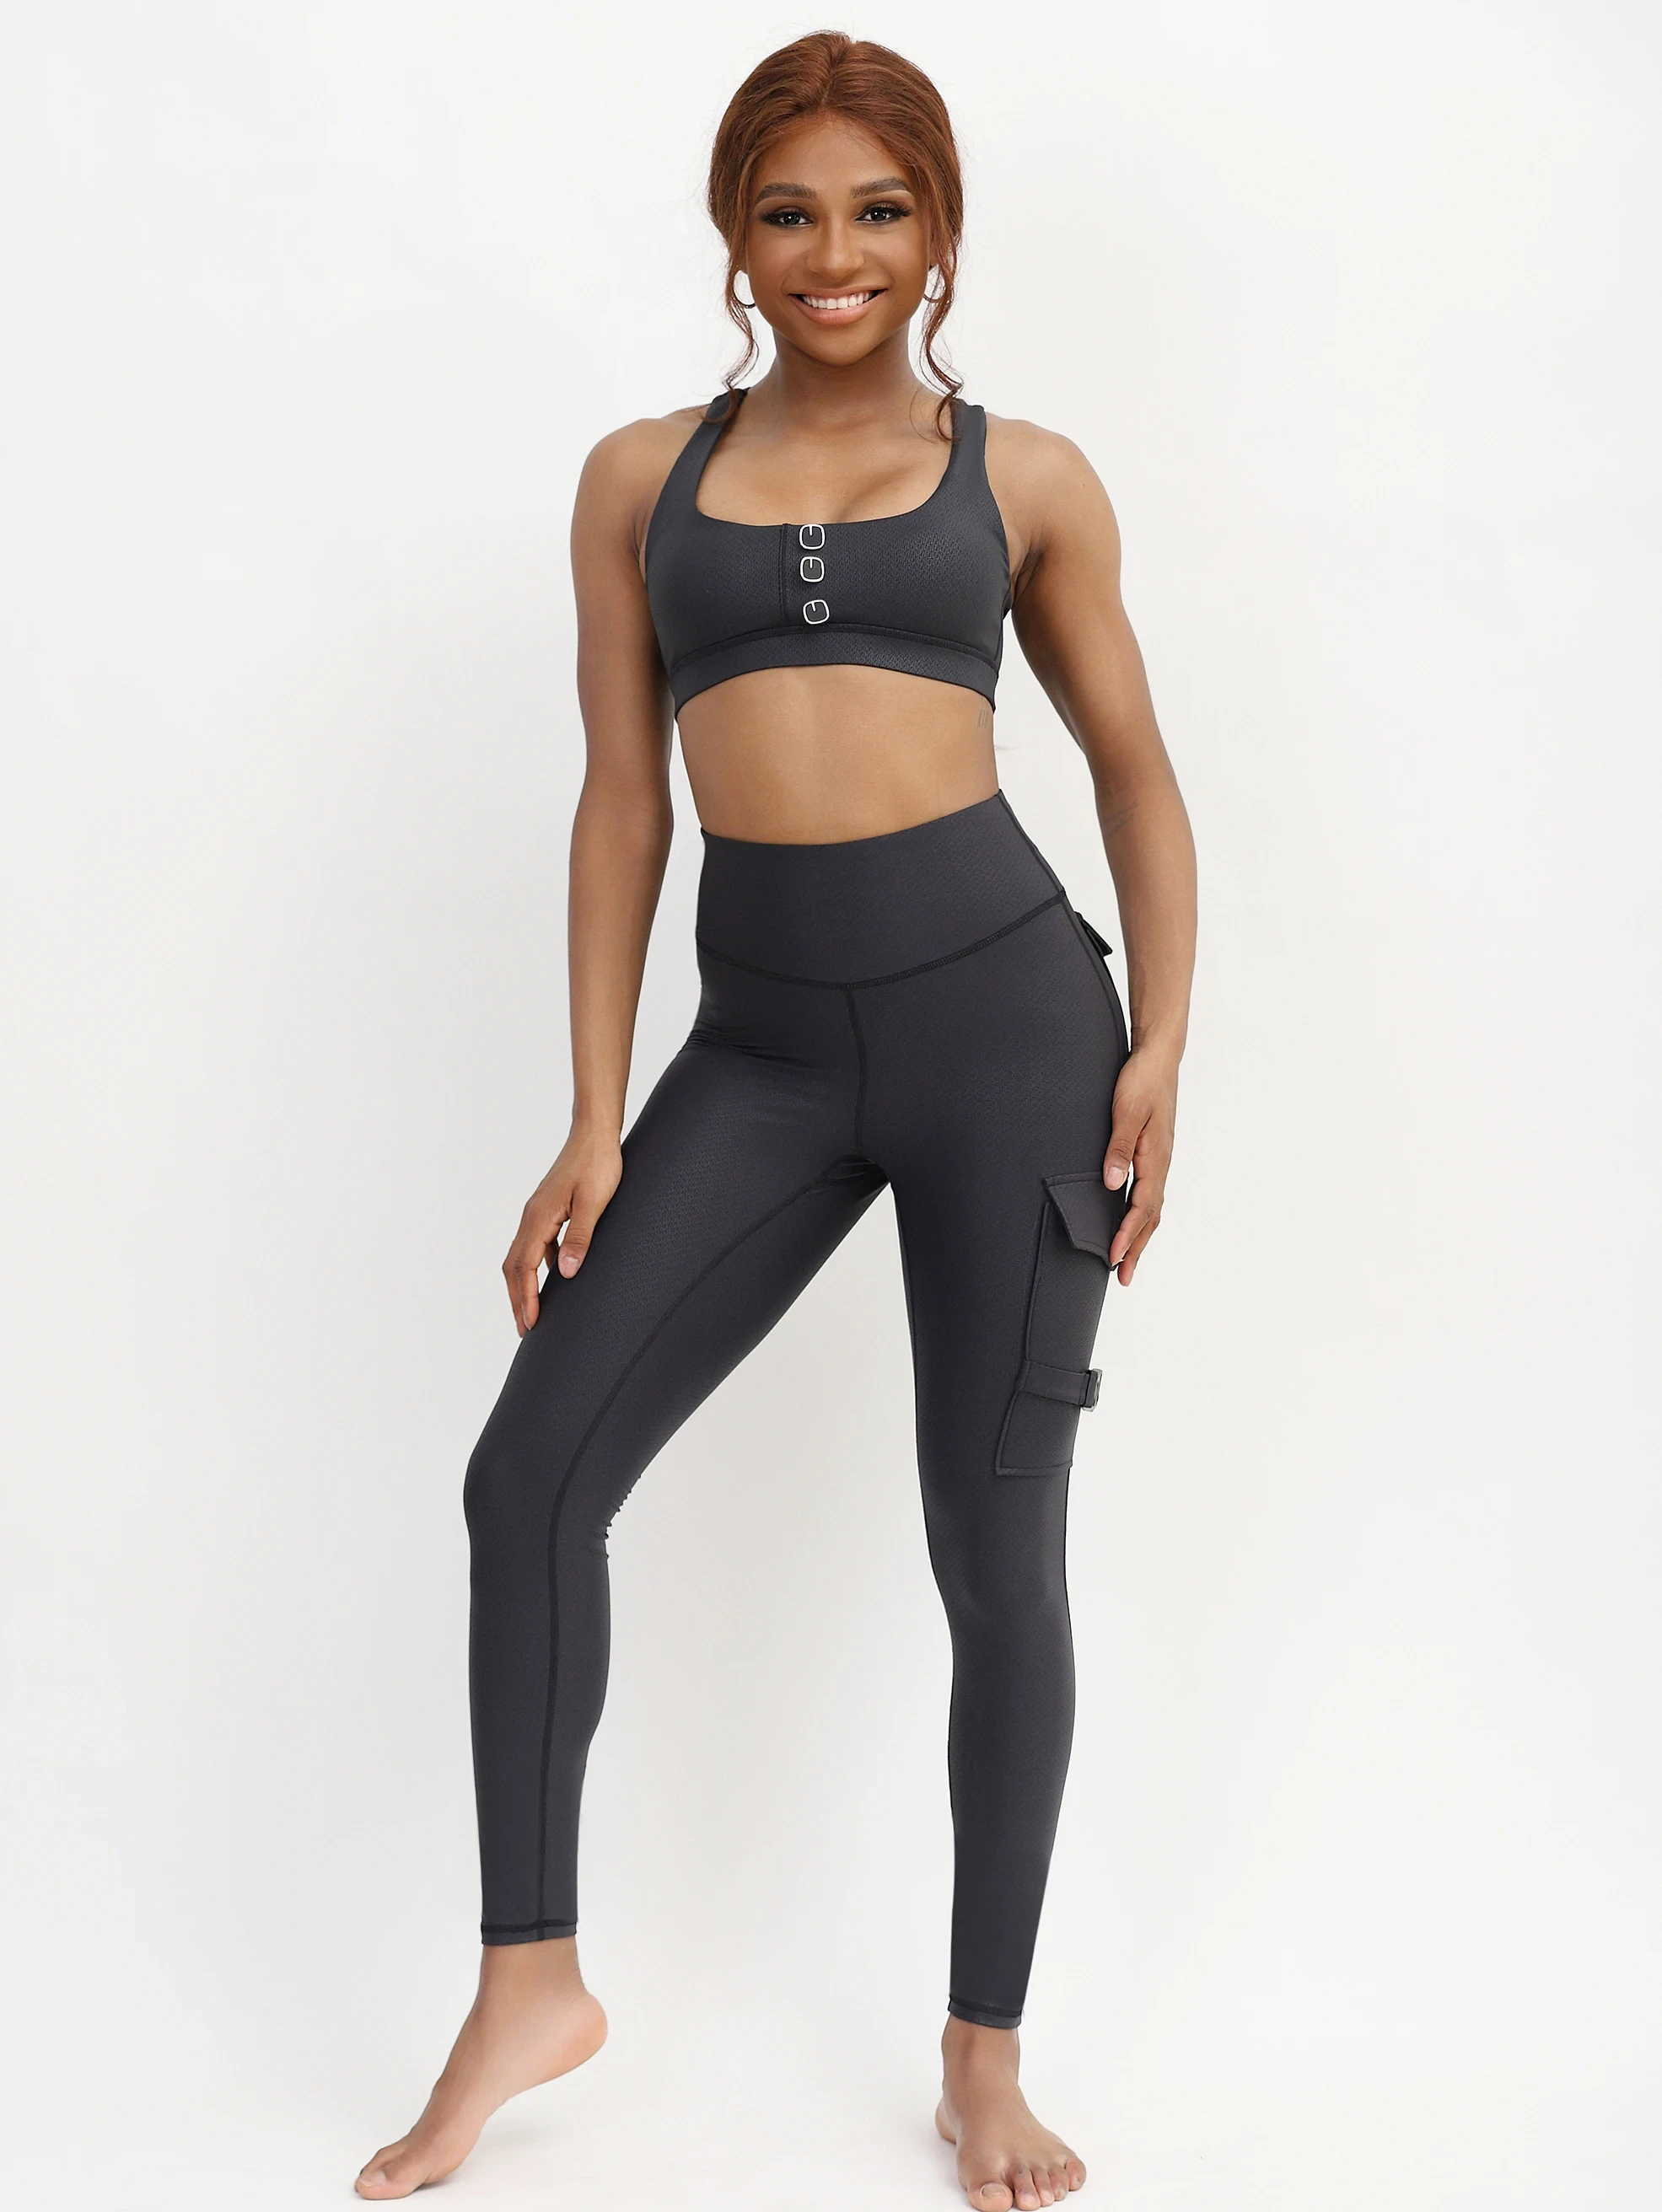 Elevate Your Workout Game with Women’s Active Wear Sets